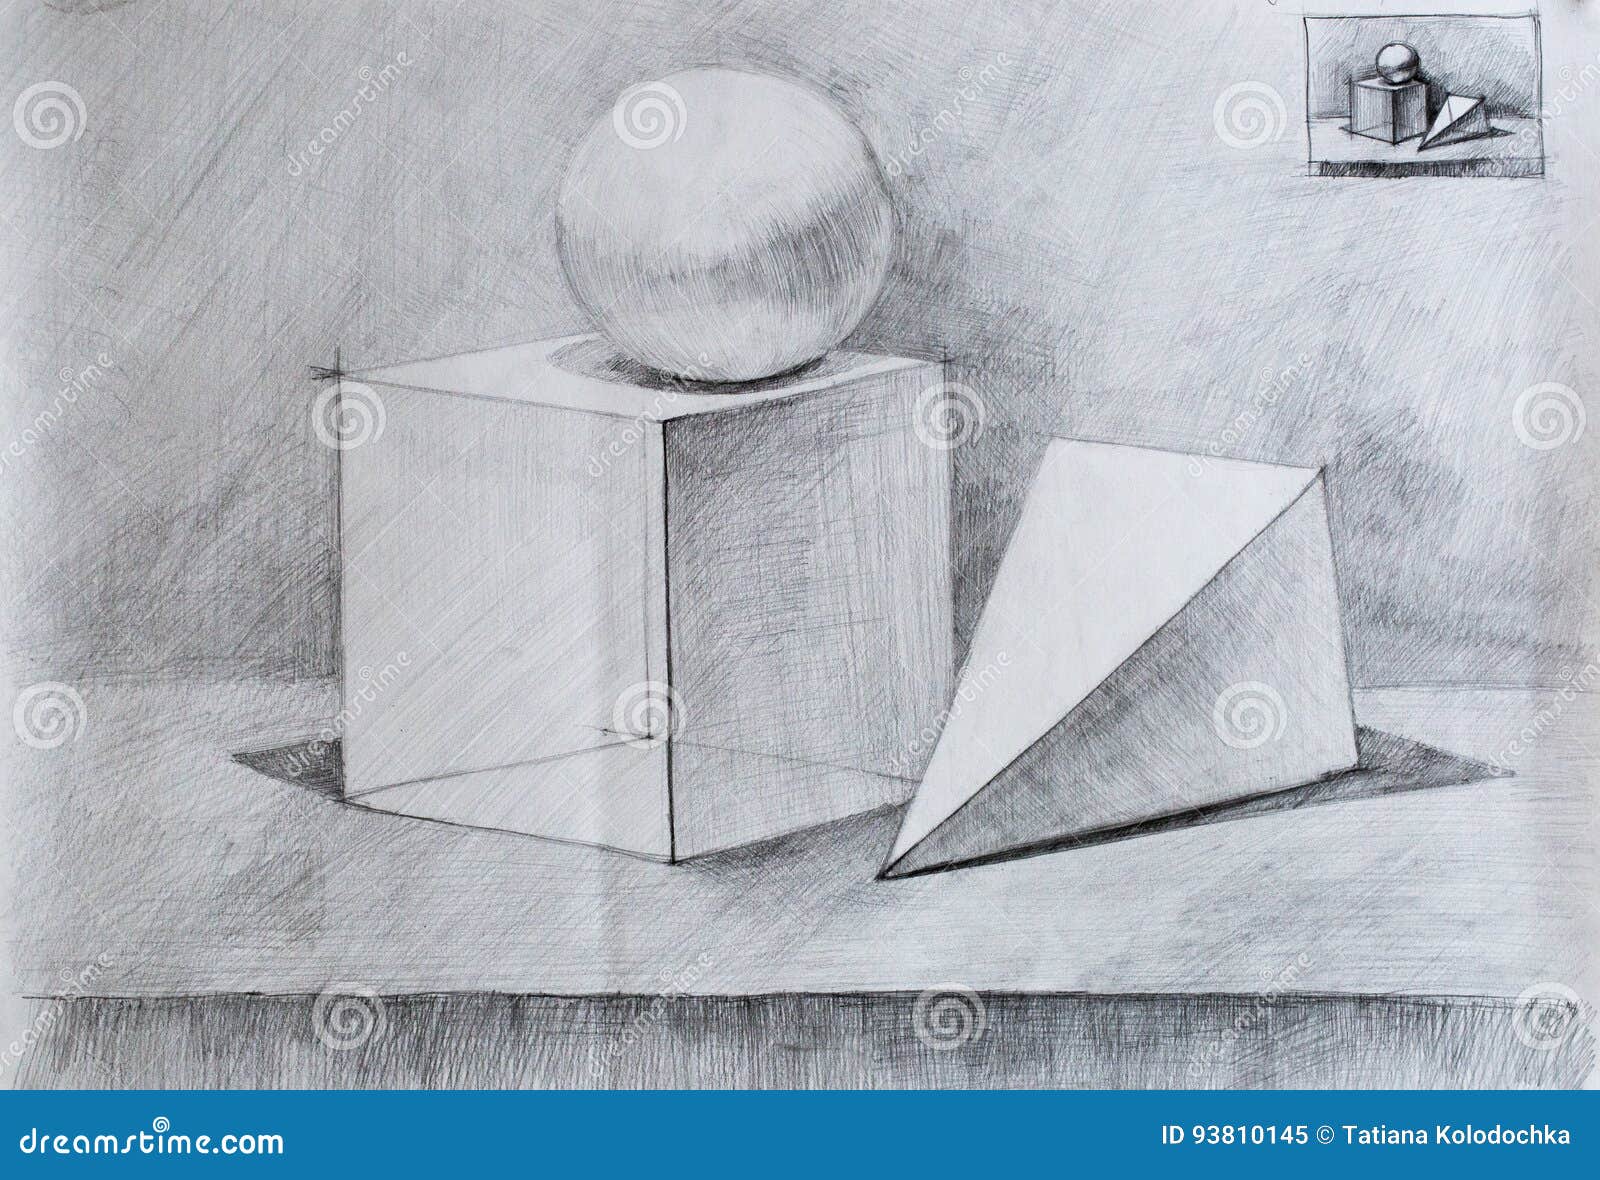 https://thumbs.dreamstime.com/z/still-life-pencil-drawing-you-your-canvas-93810145.jpg